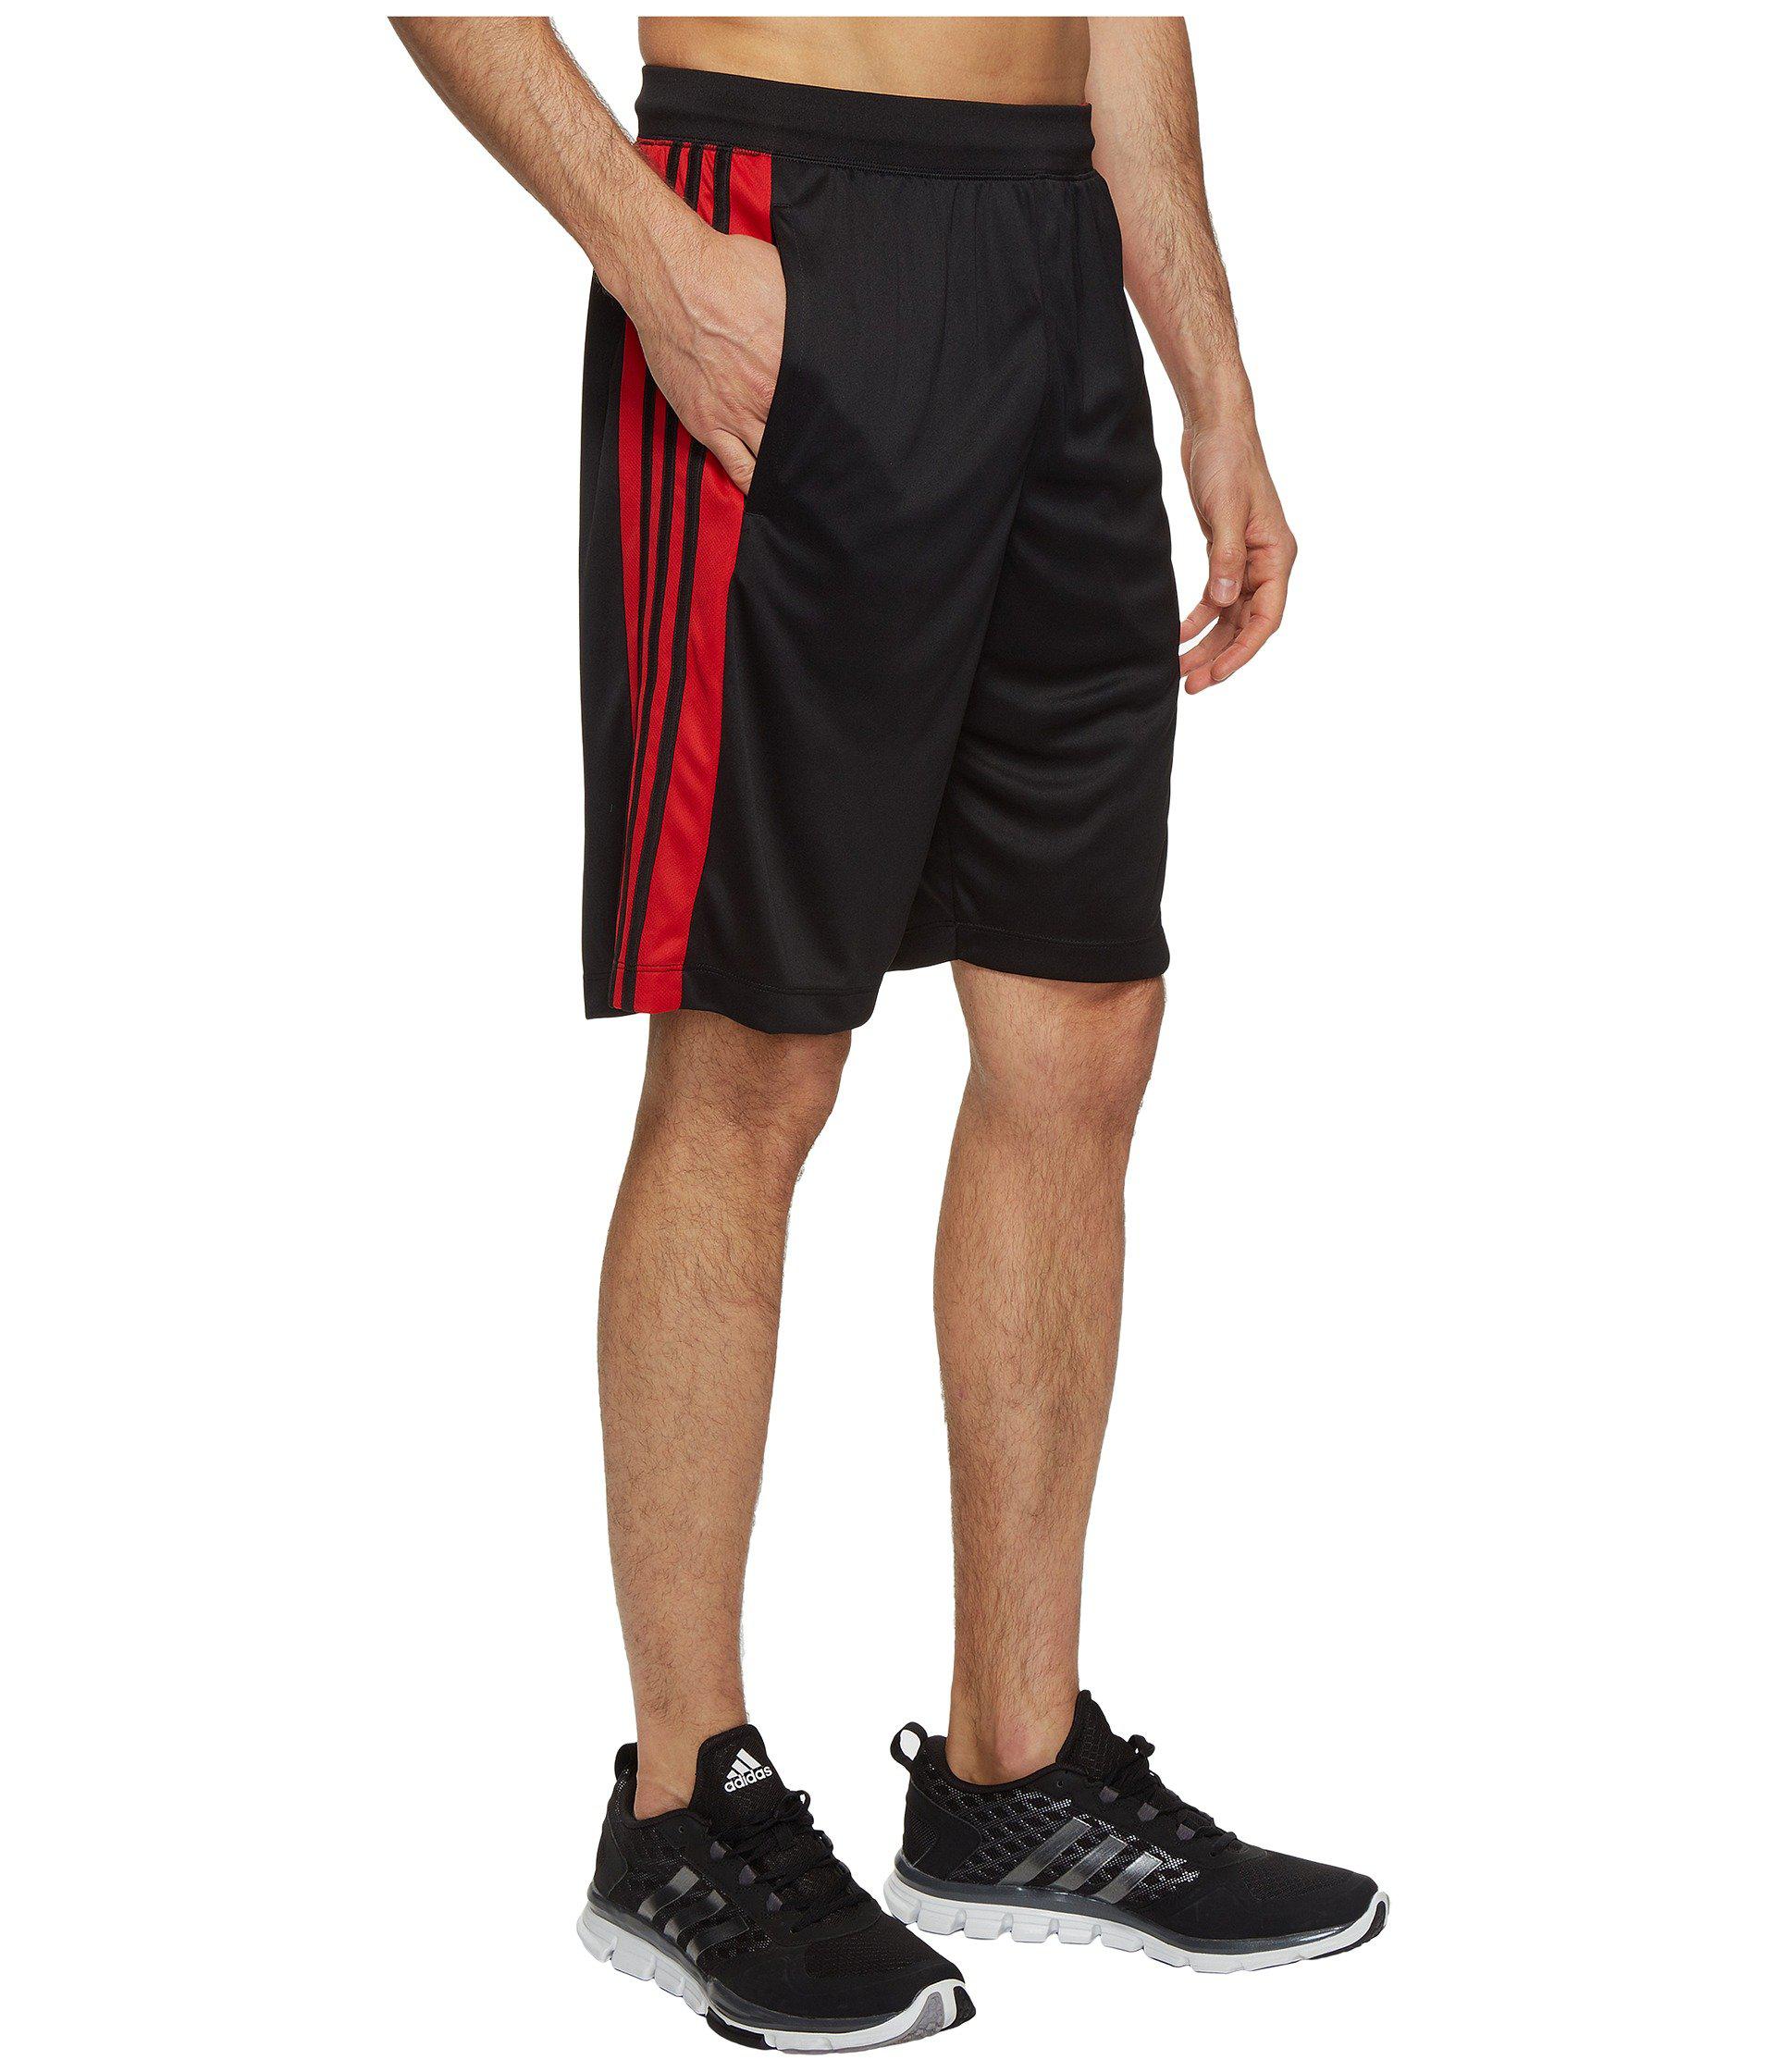 adidas Designed-2-move 3-stripes Shorts in Black for Men - Lyst